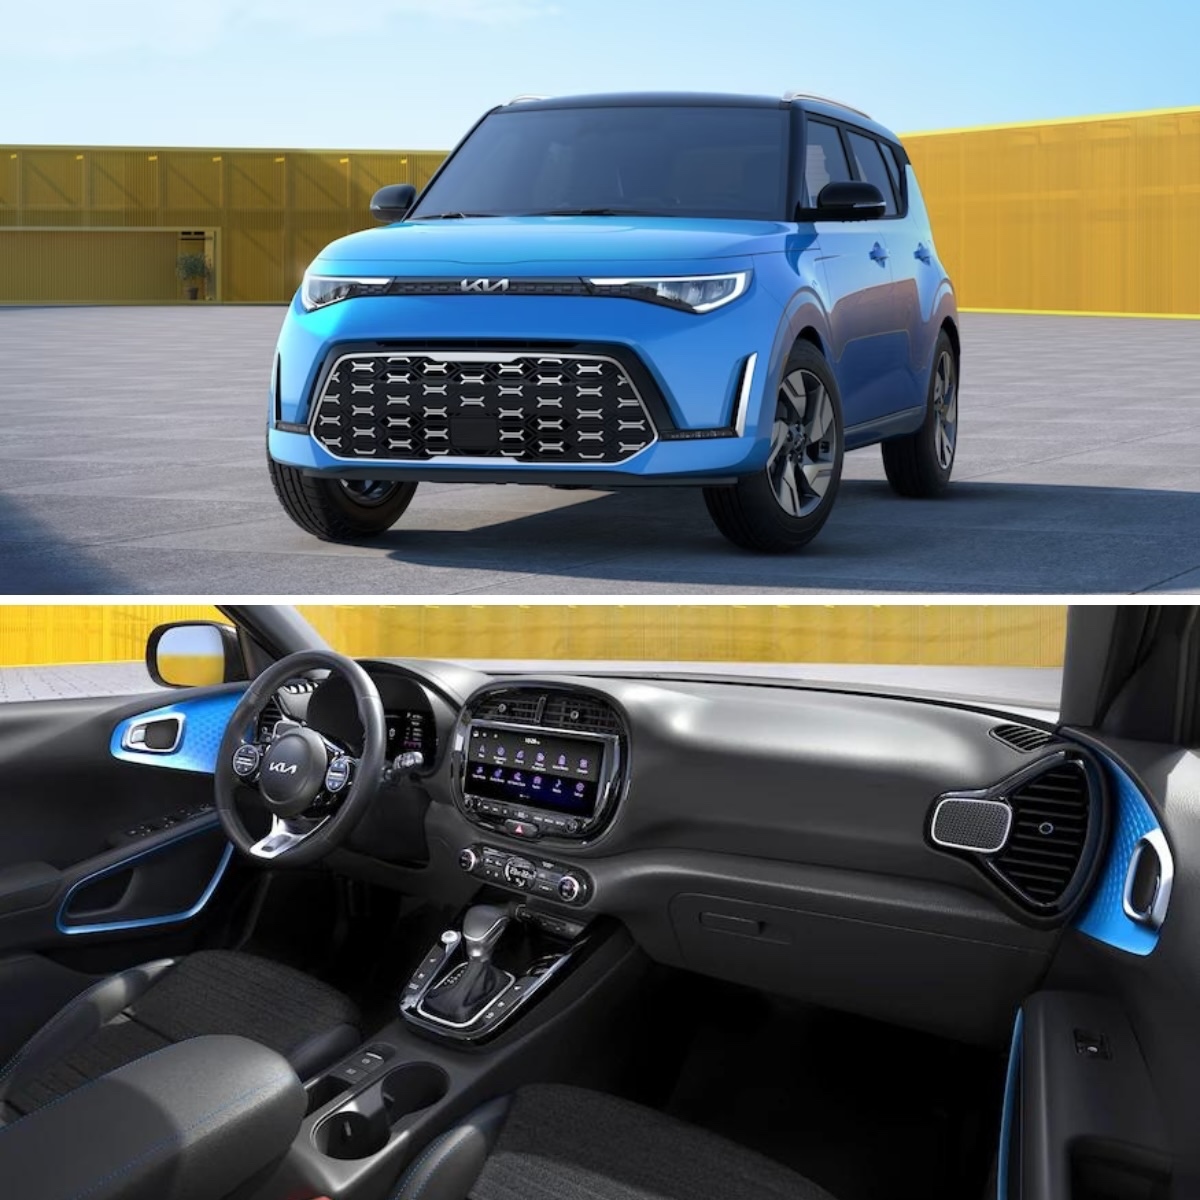 Let the 2024 #KiaSoul be your gateway to new adventures! Sleek, stylish, and ready for anything. Hurry and visit us today to get behind the wheel of your new ride! #CarCrushWednesday #Kia #KiaUSA